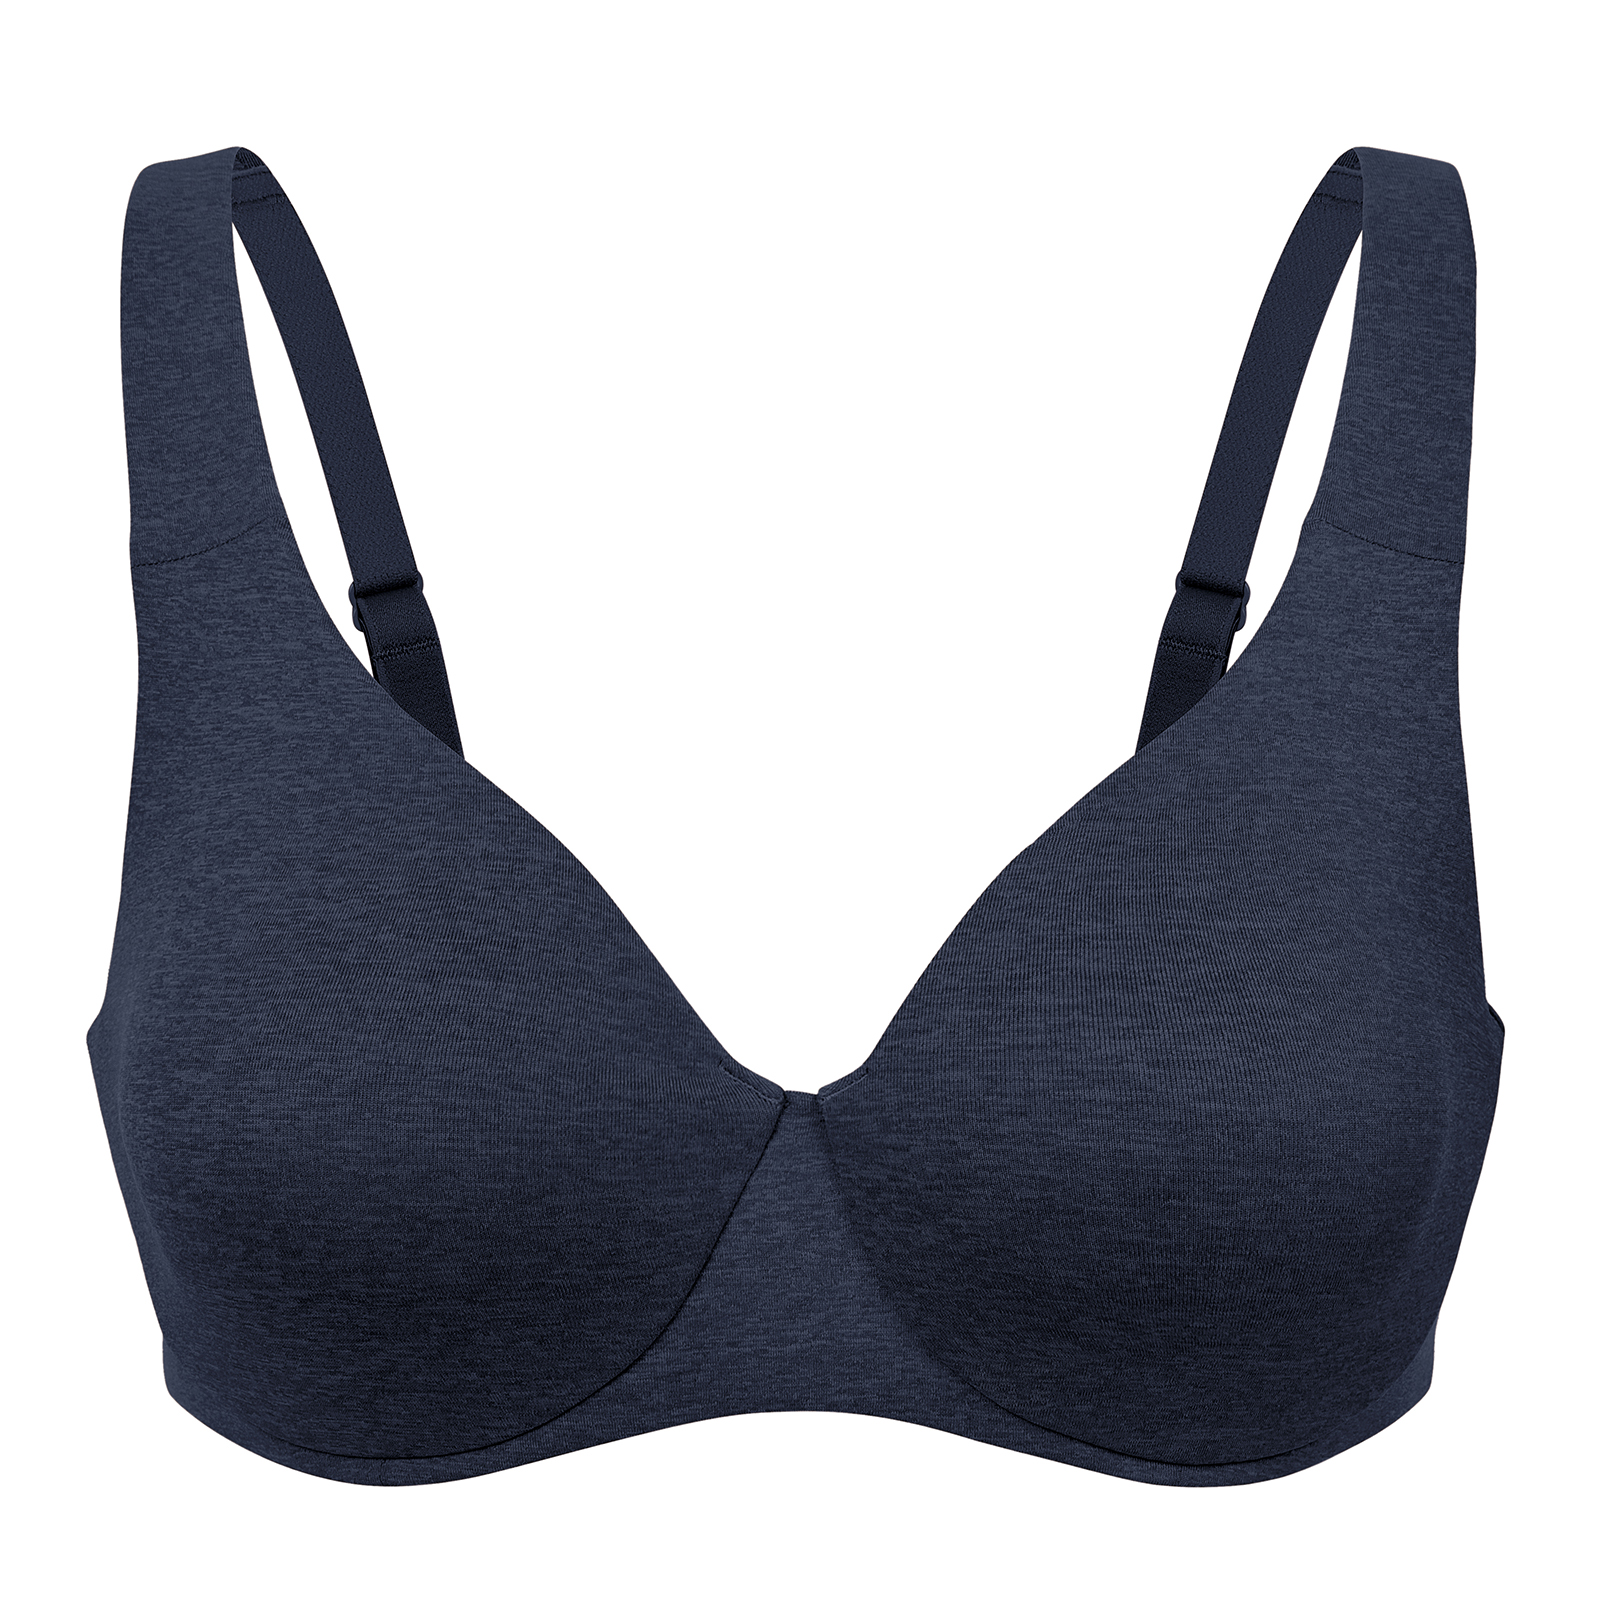 AISILIN Women's Seamless Full Coverage Unlined Underwire Bras Plus